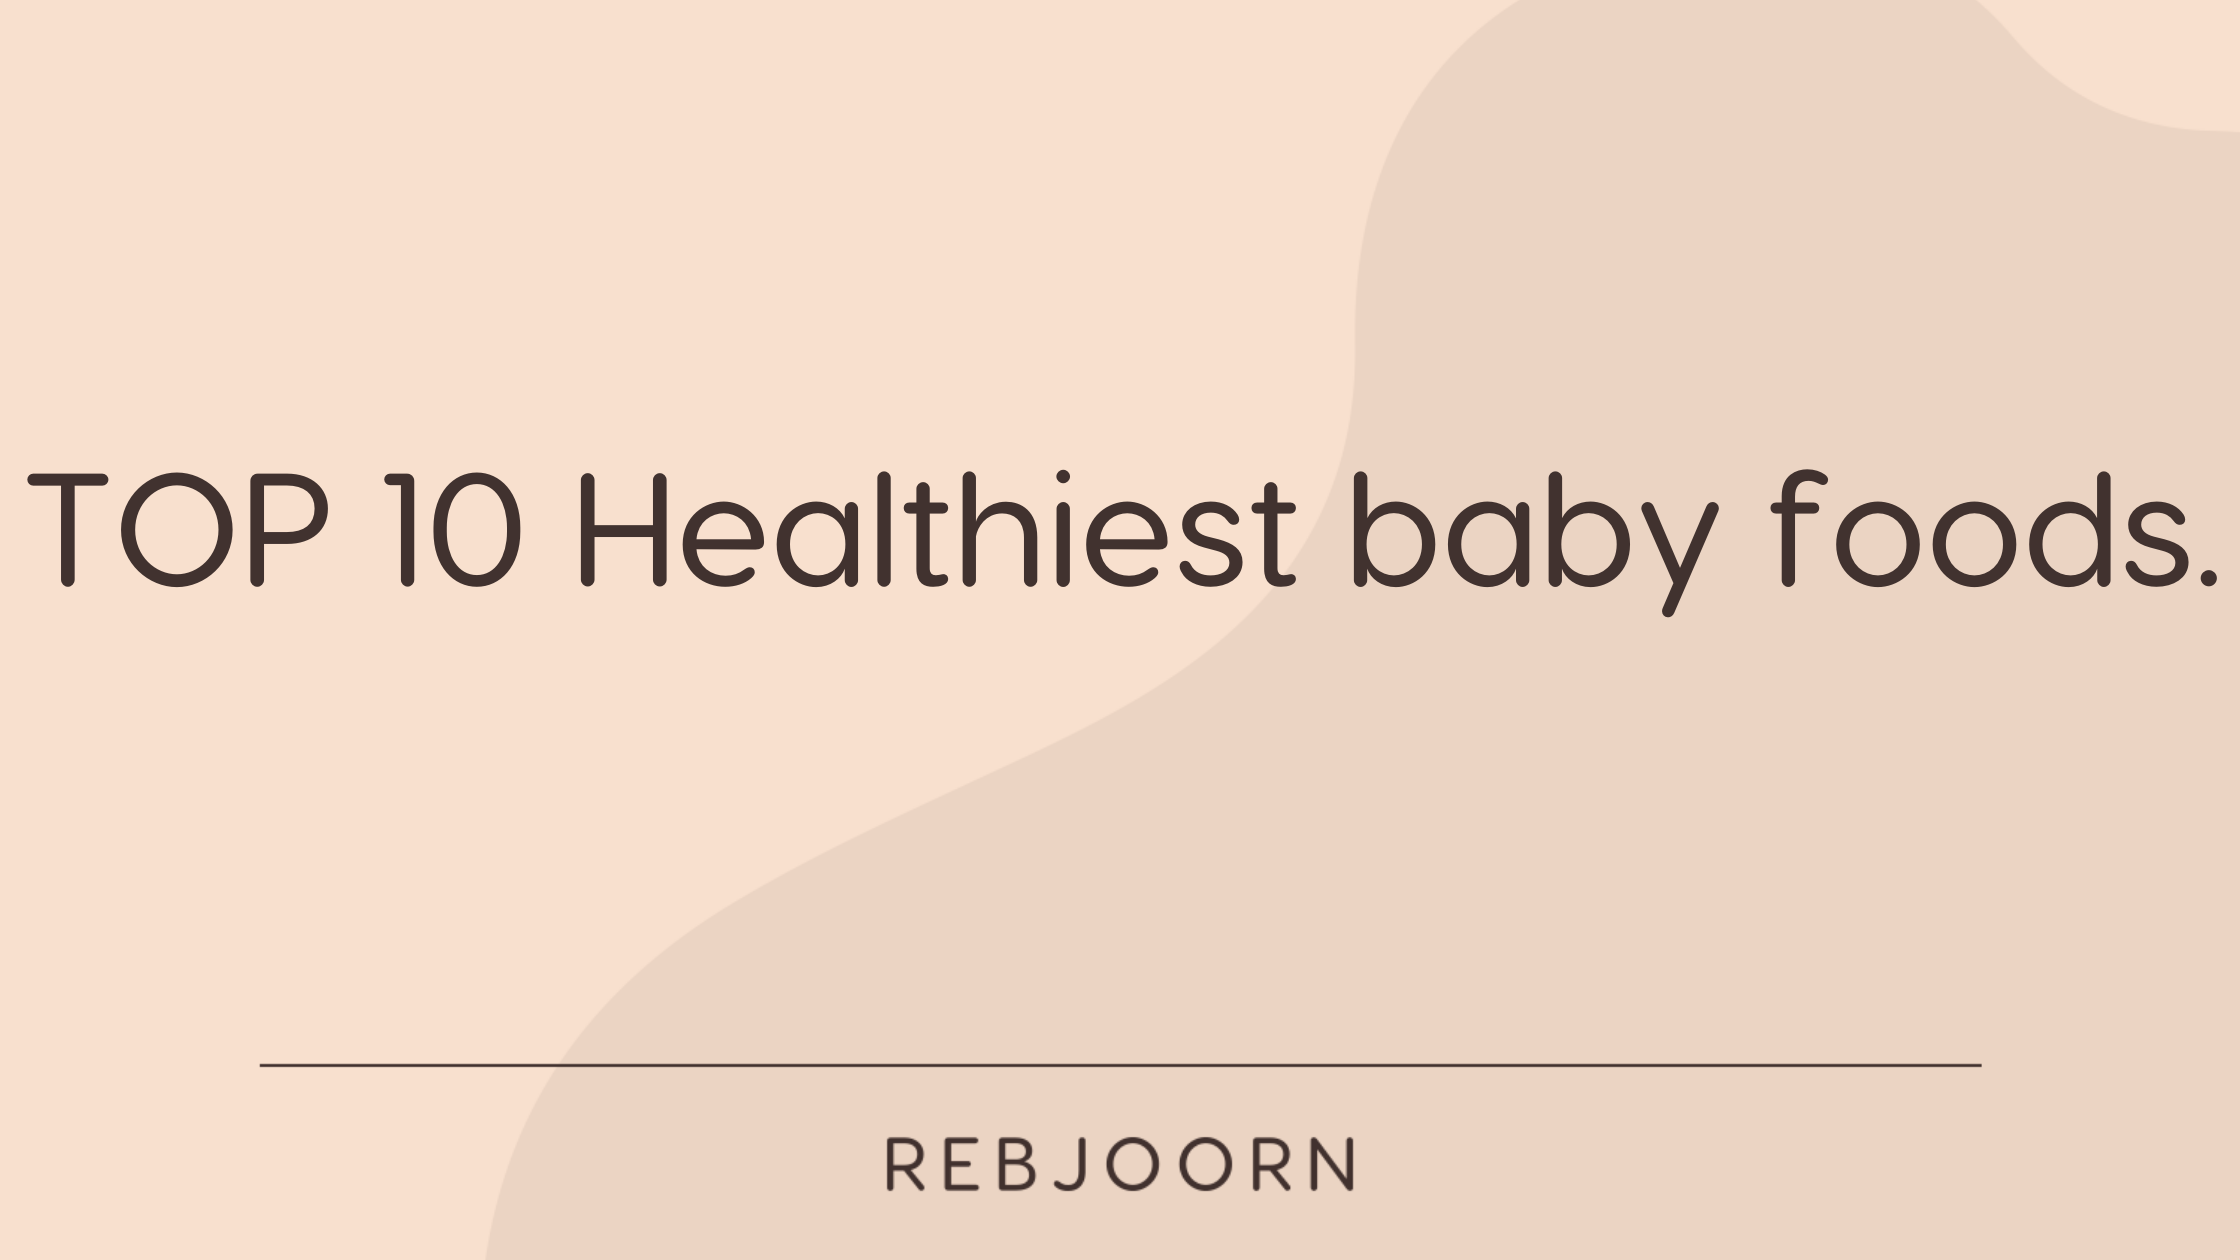 What are the 10 healthiest foods for babies?